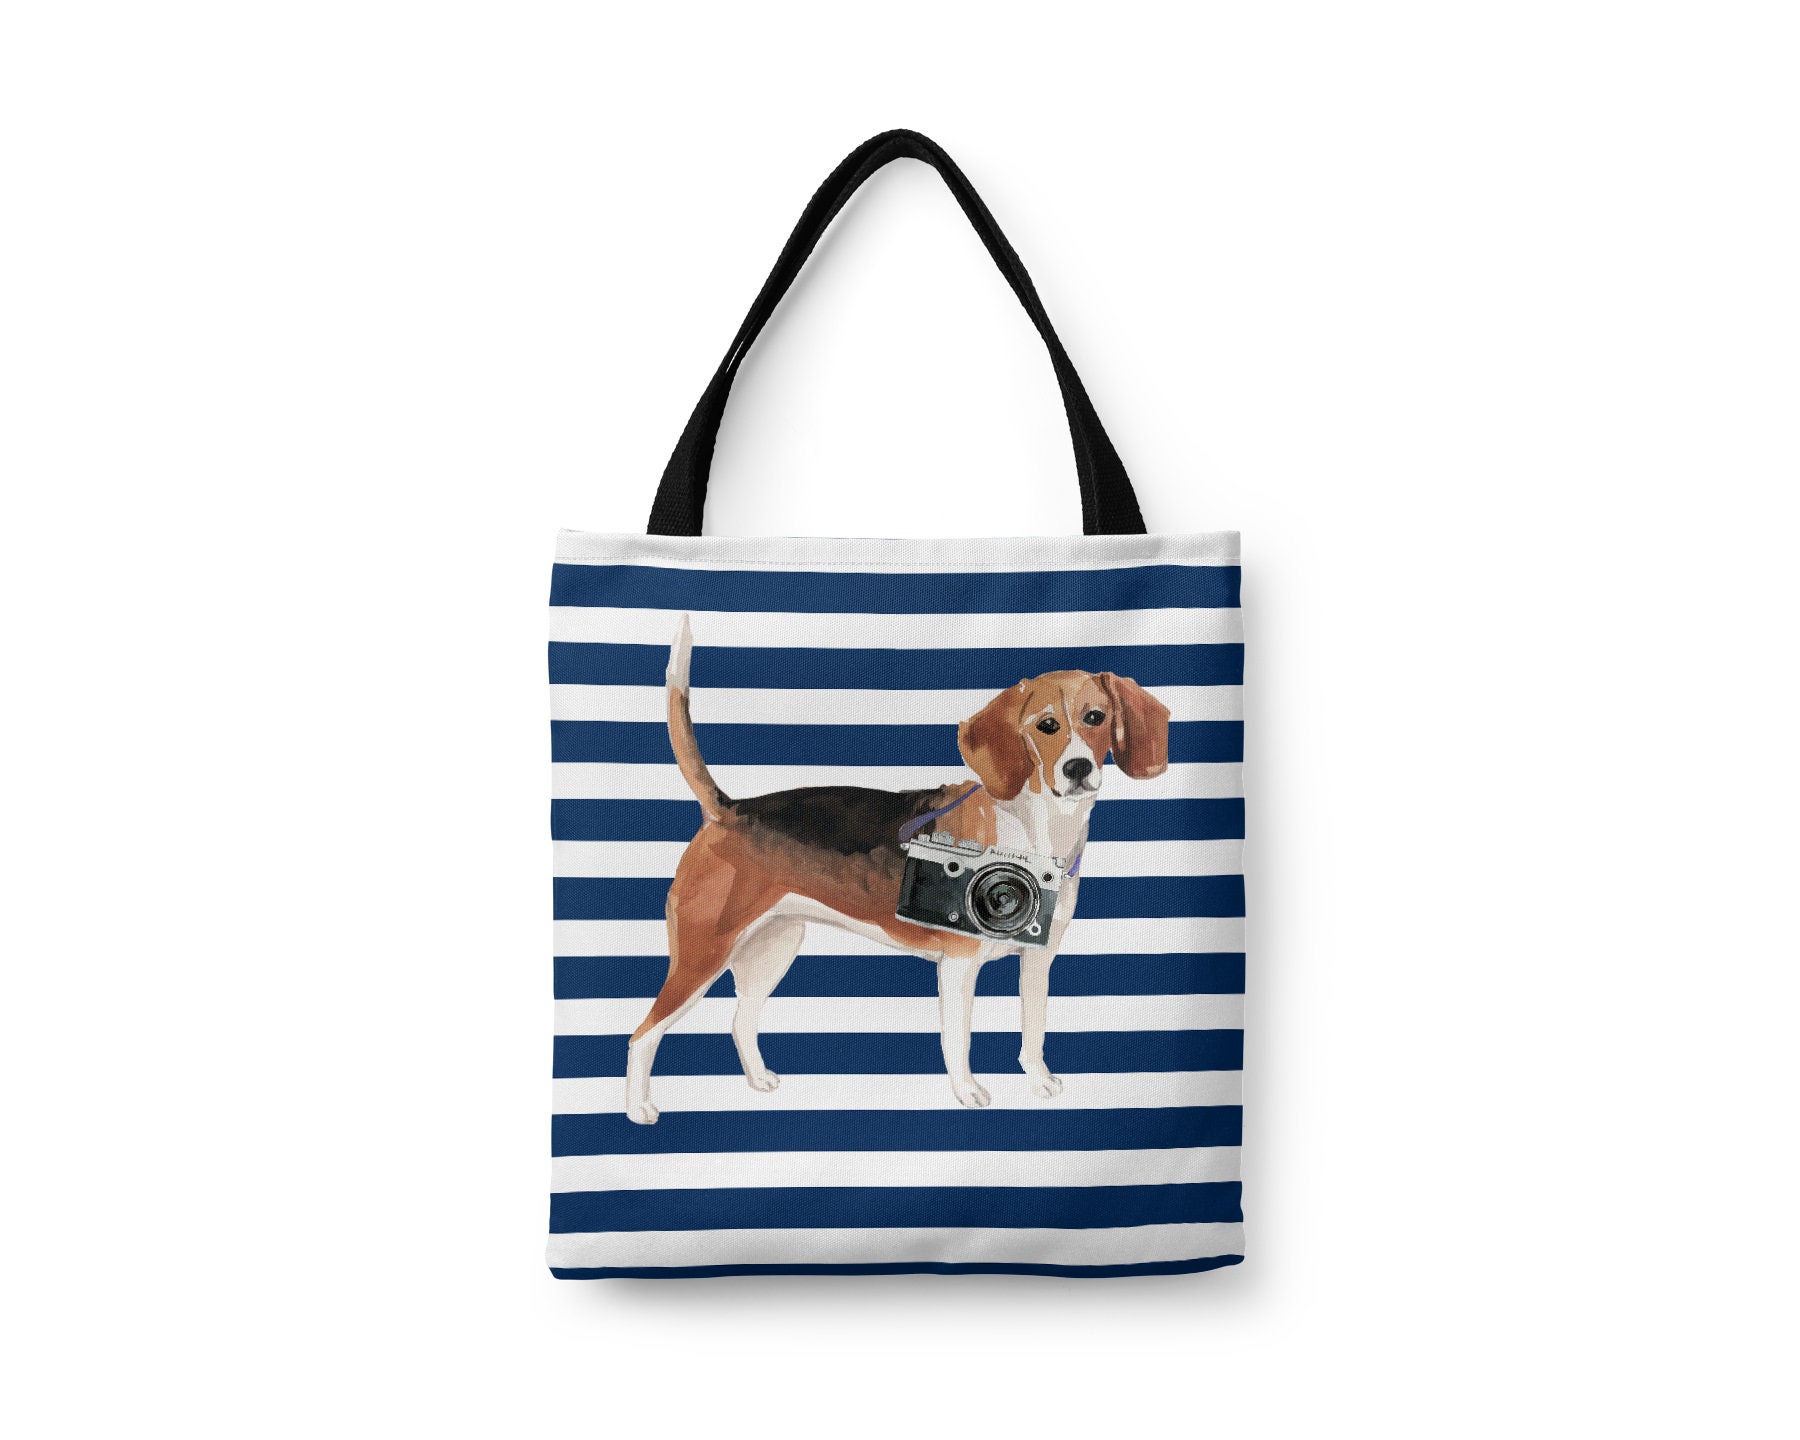 Beagle Dog Large Tote Bag - Illustrated Dogs & 6 Travel Inspired Styles. All Purpose For Books, Work, Shopping, Life... English